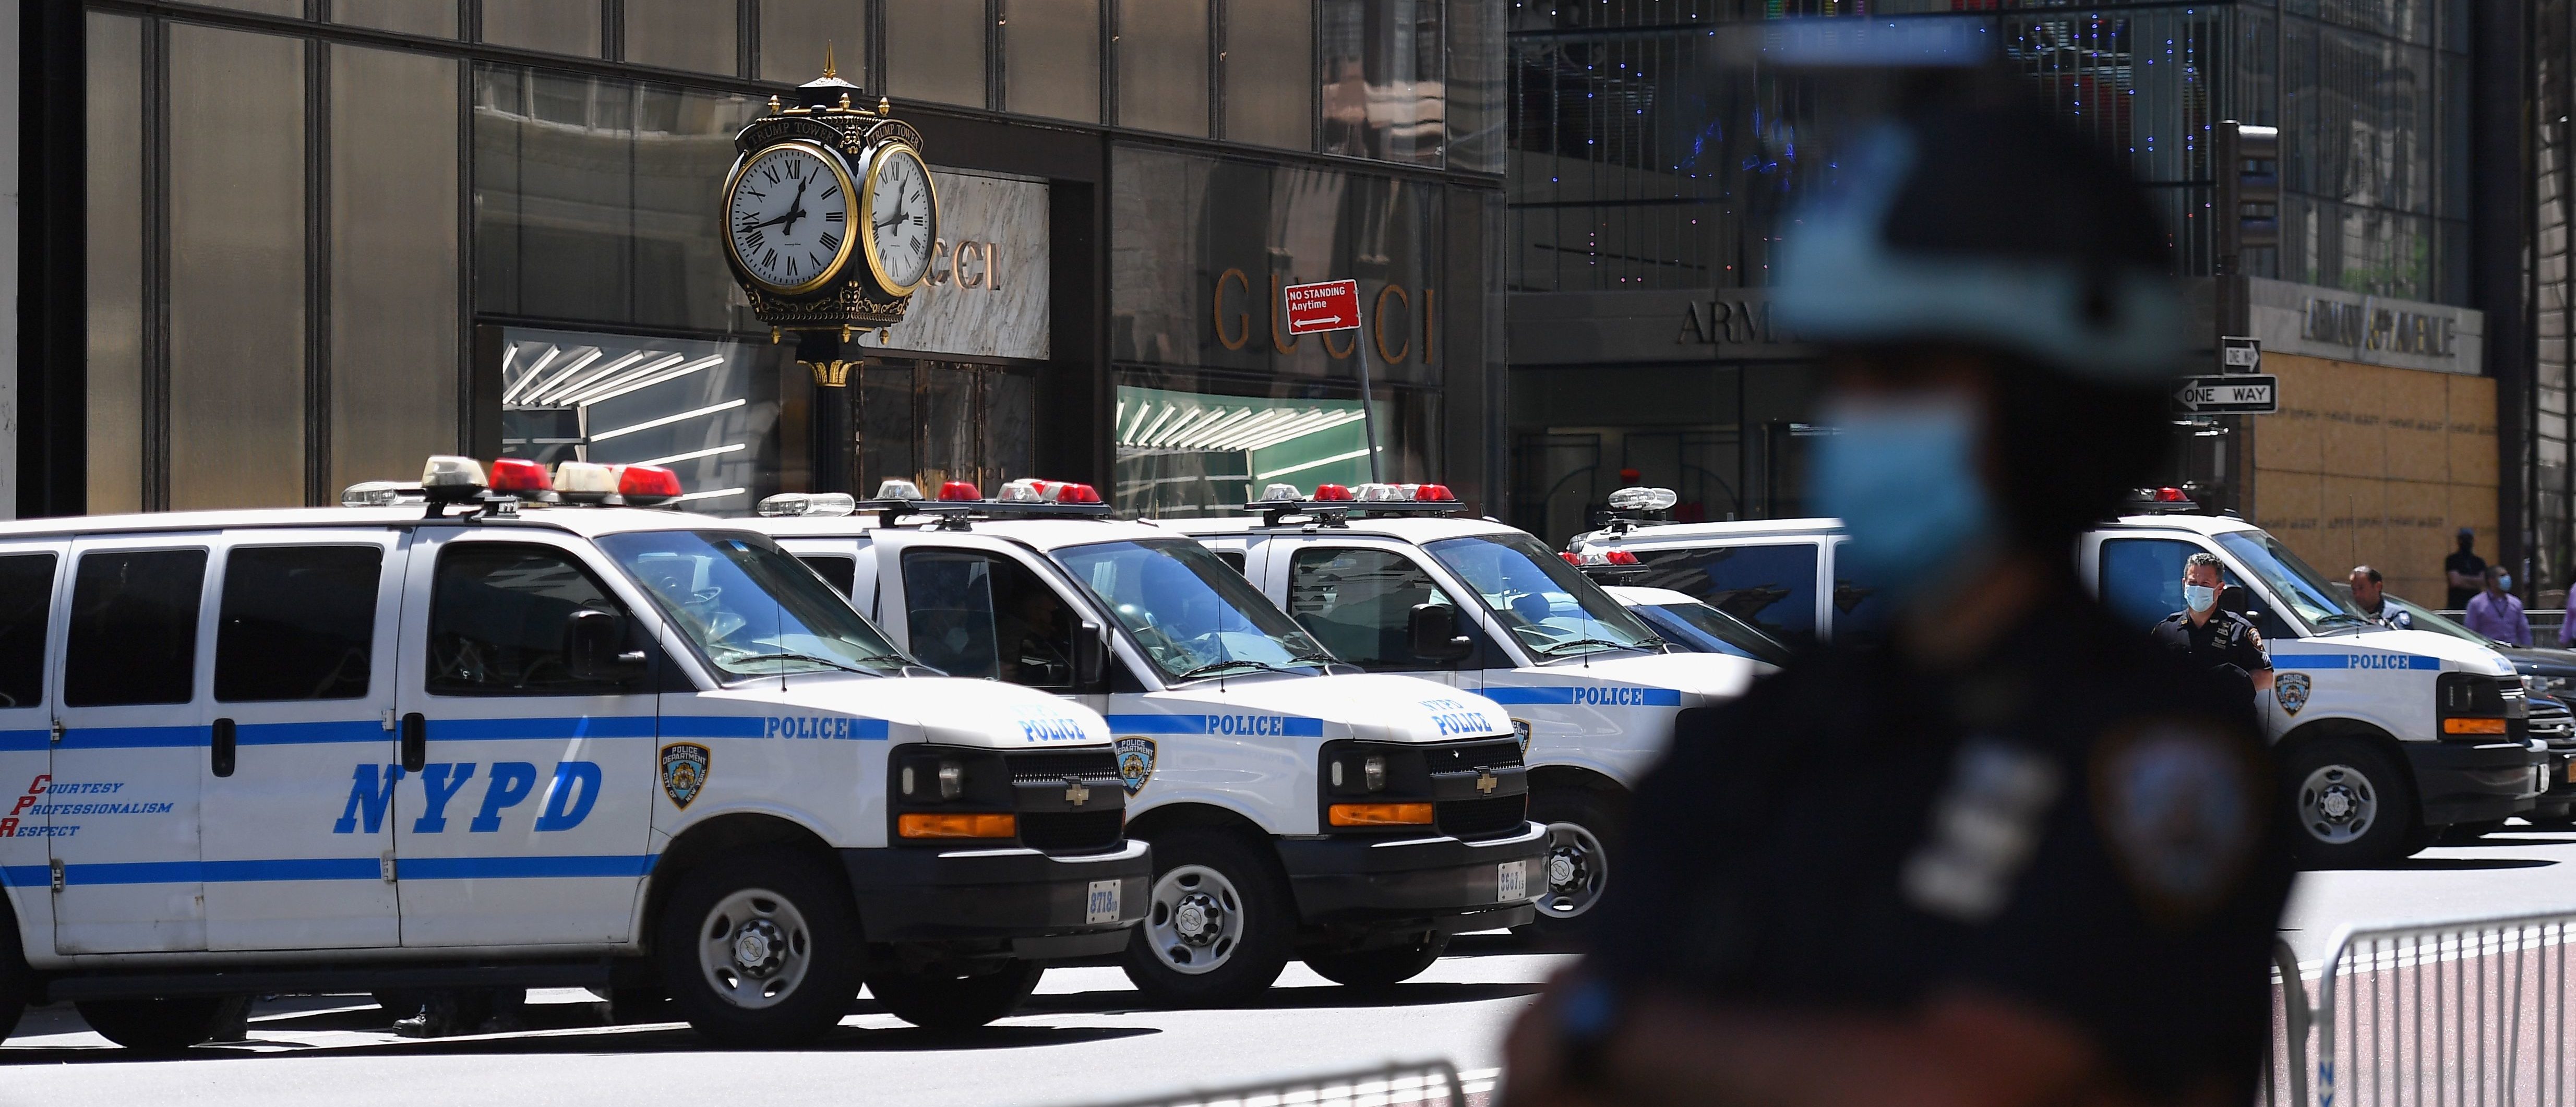 NYC Passes Budget That Will Defund The NYPD By $1 Billion | The Daily ...